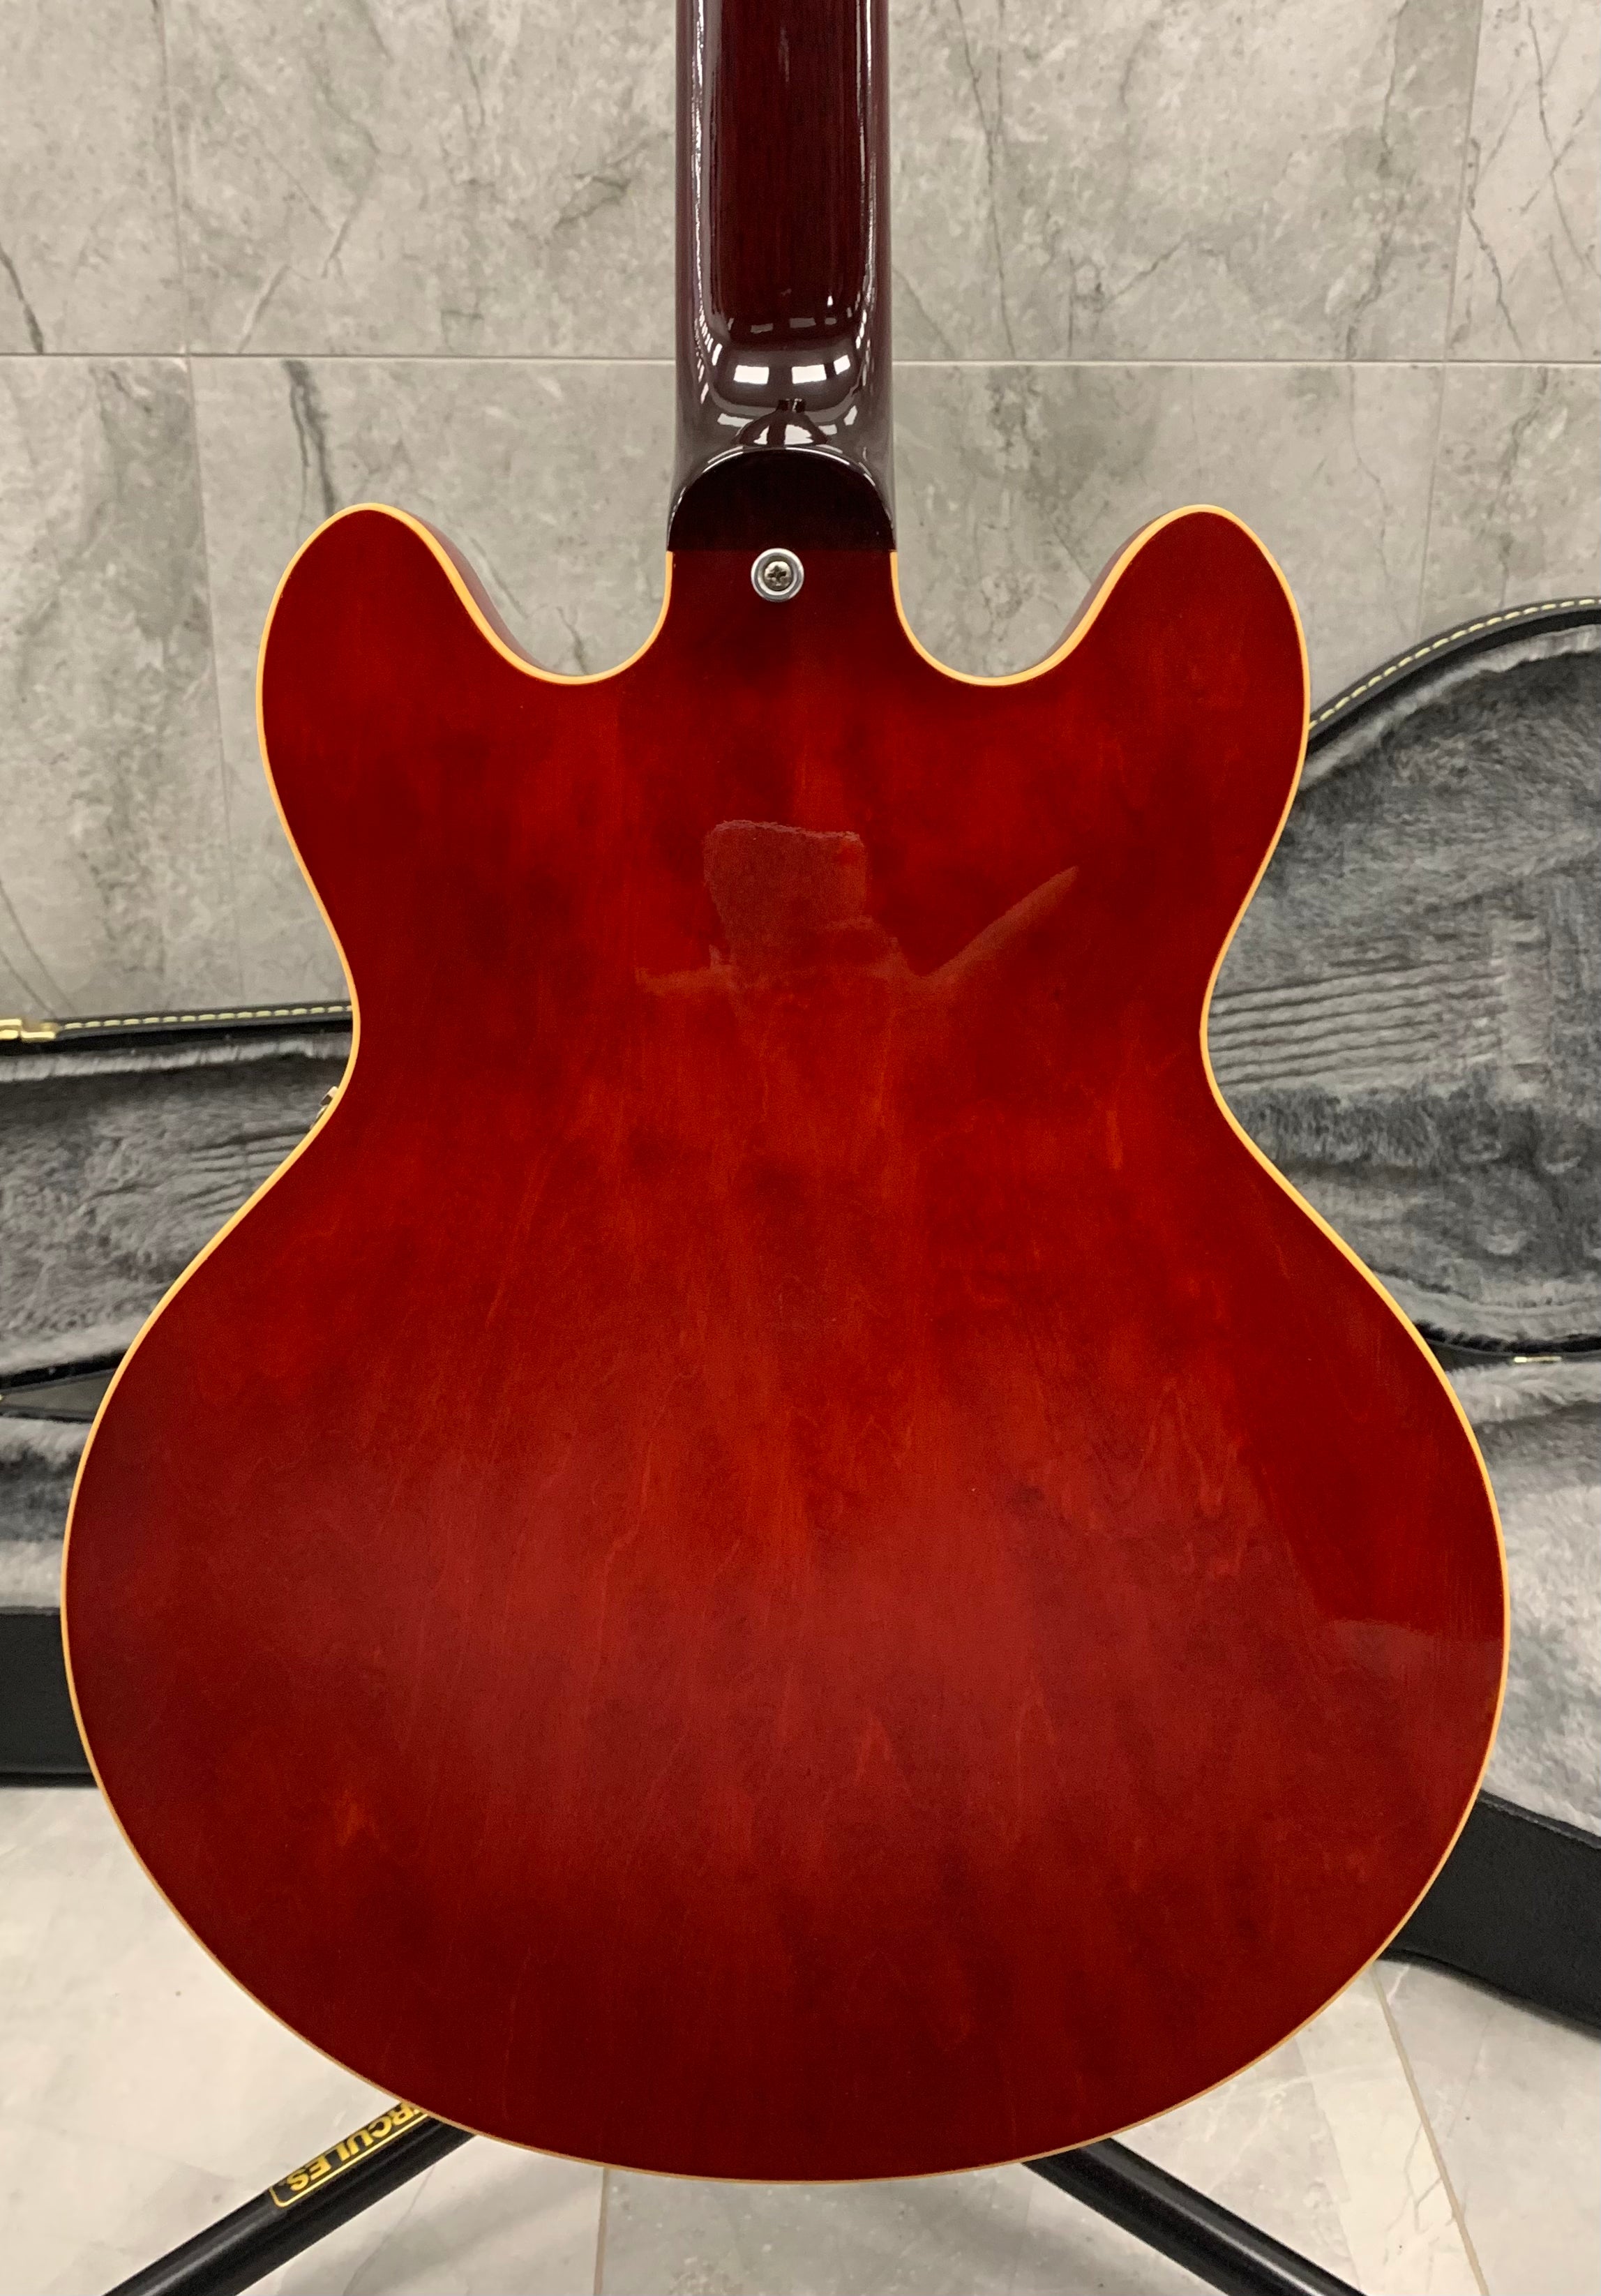 GIBSON ES 339 CHERRY GLOSS FINISH - USED 2008 - SEE PICTURES FOR DETAILS SERIAL NUMBER CS80792 - 8.0 LBS